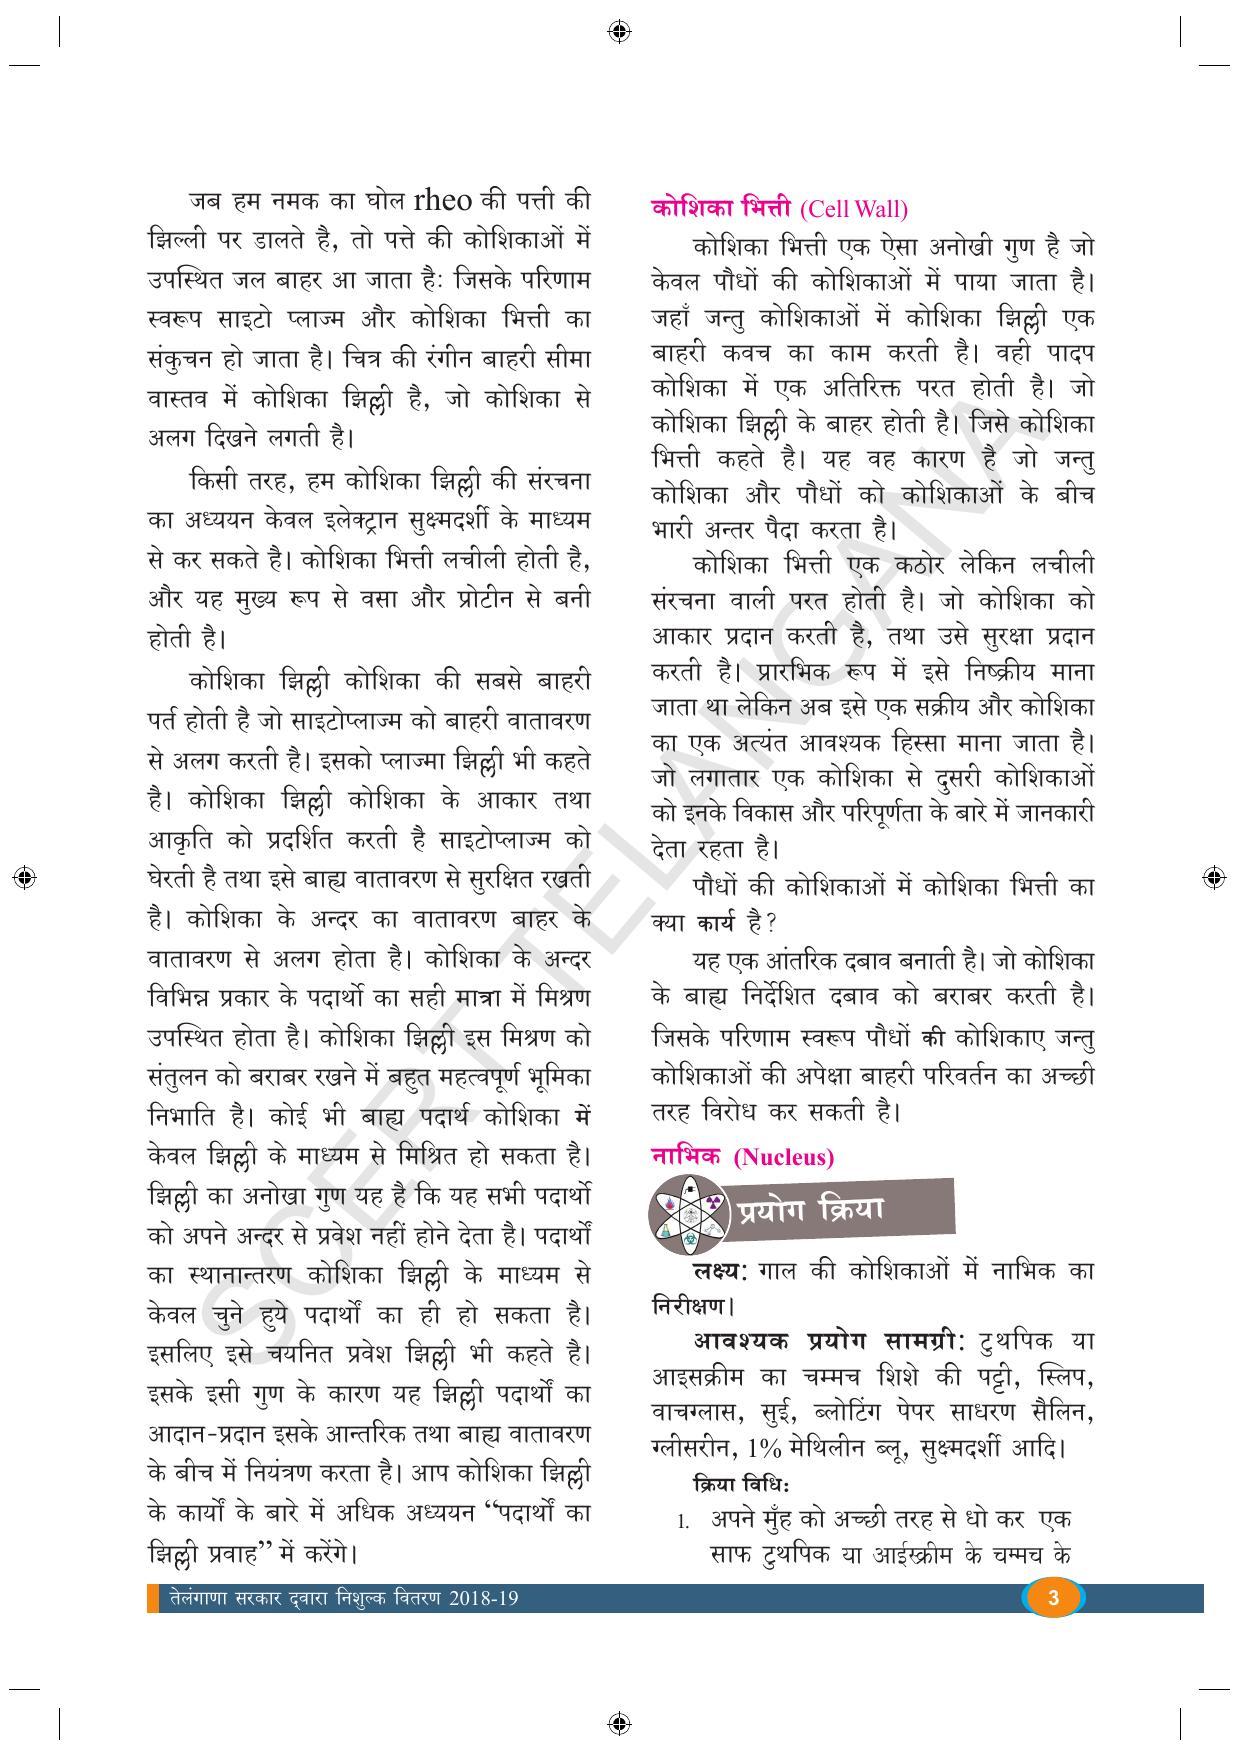 TS SCERT Class 9 Biological Science (Hindi Medium) Text Book - Page 15